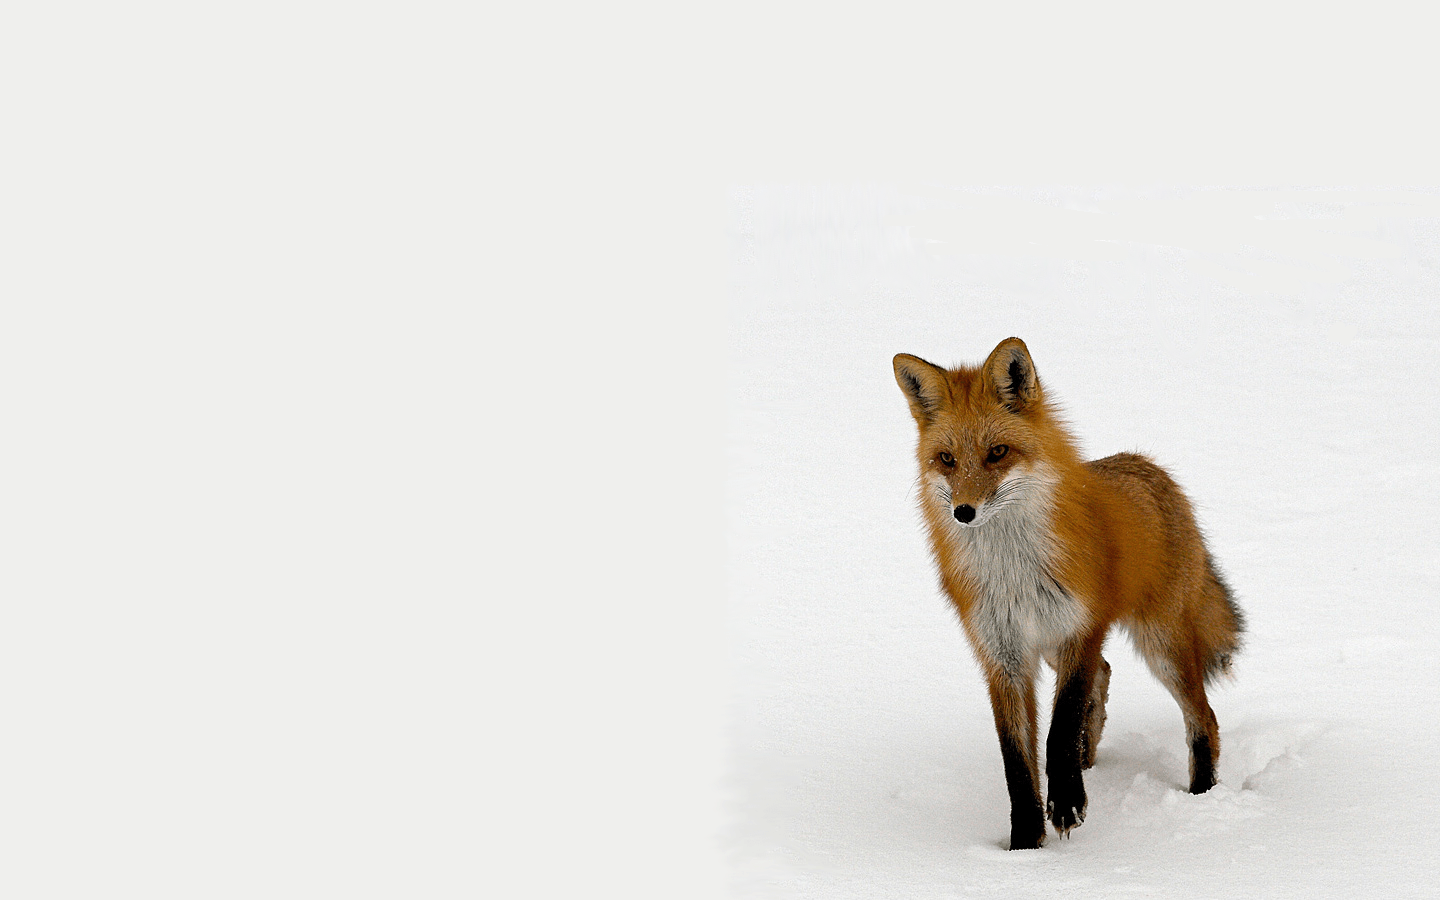 image about Fox. Snow, Red fox and Stretching